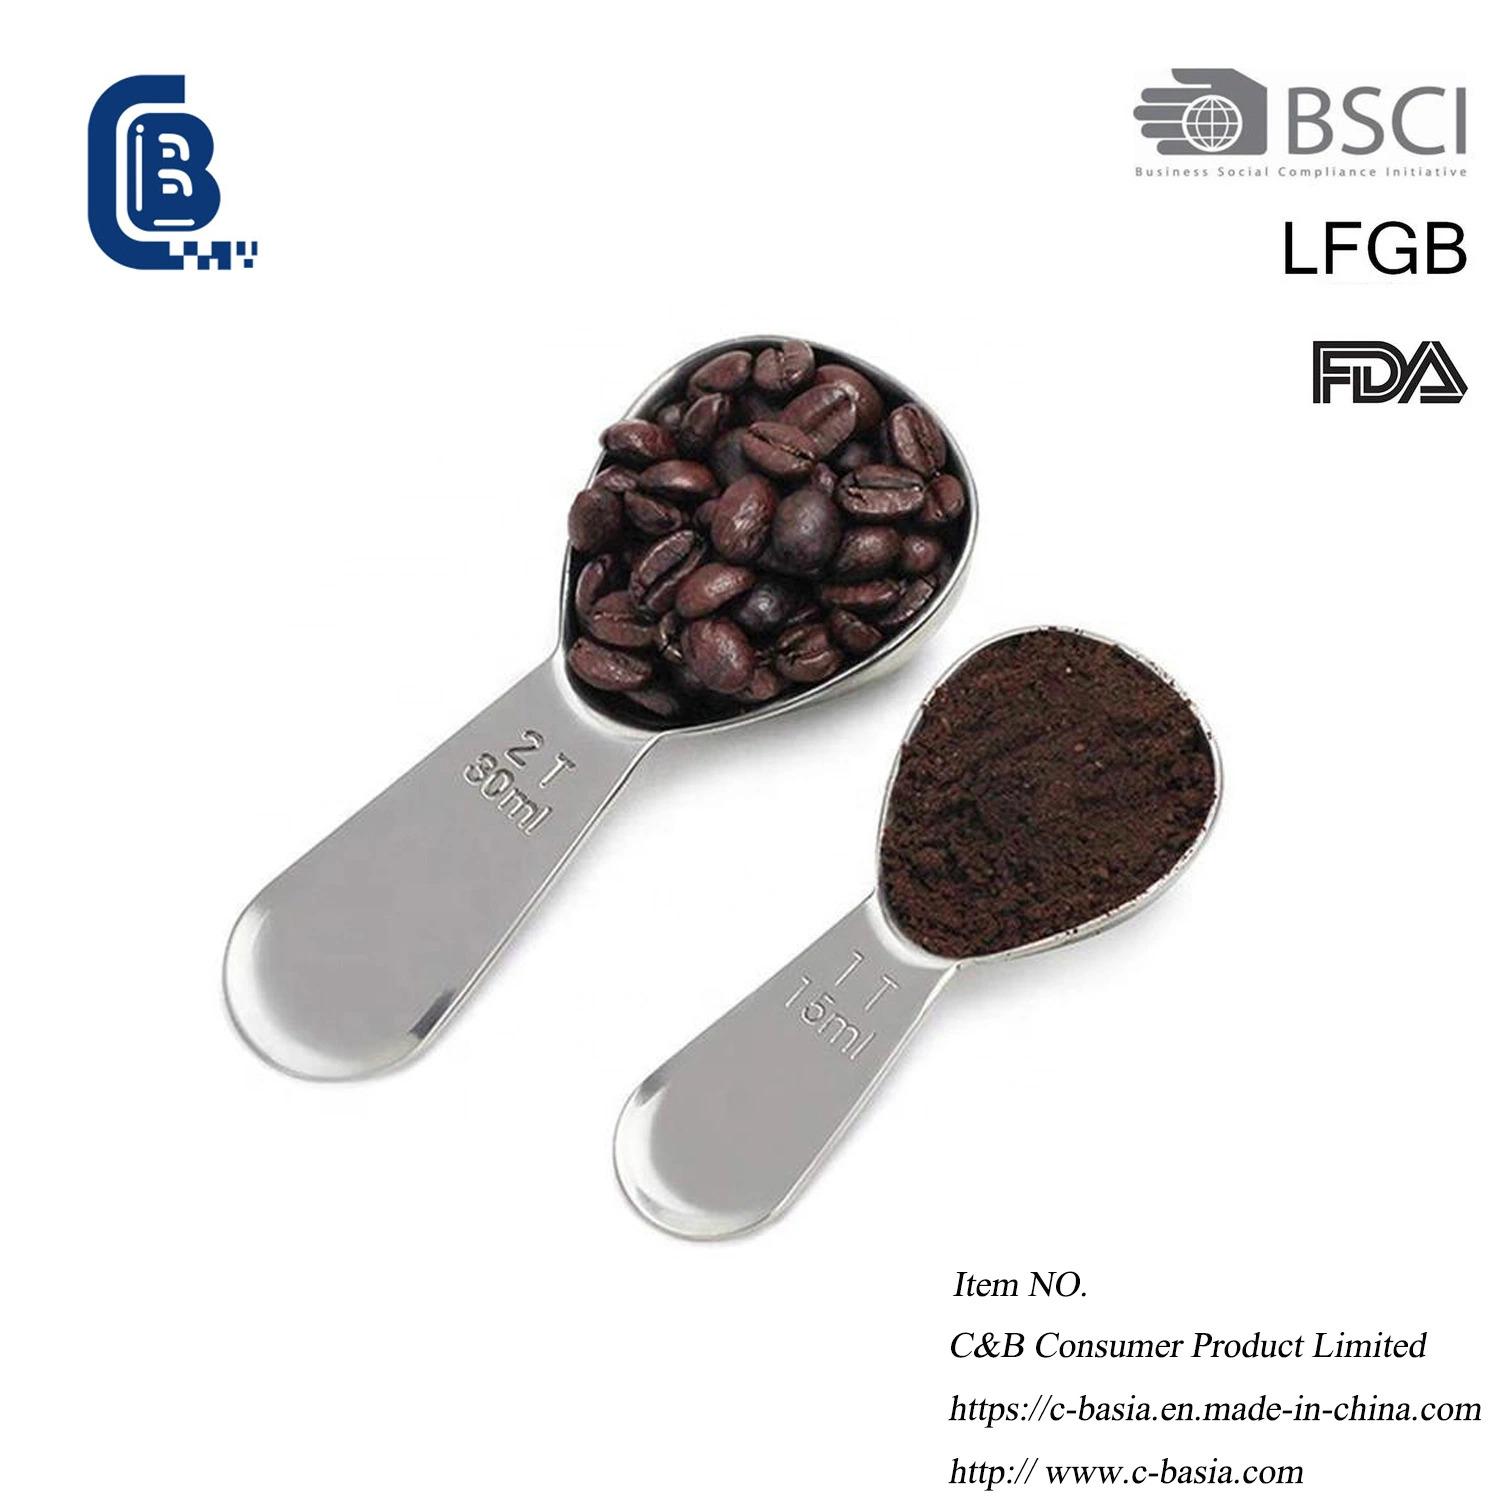 Hot Sale High quality/High cost performance  Powder Scoop Coffee Measuring Spoon Stainless Steel for Milk Powder